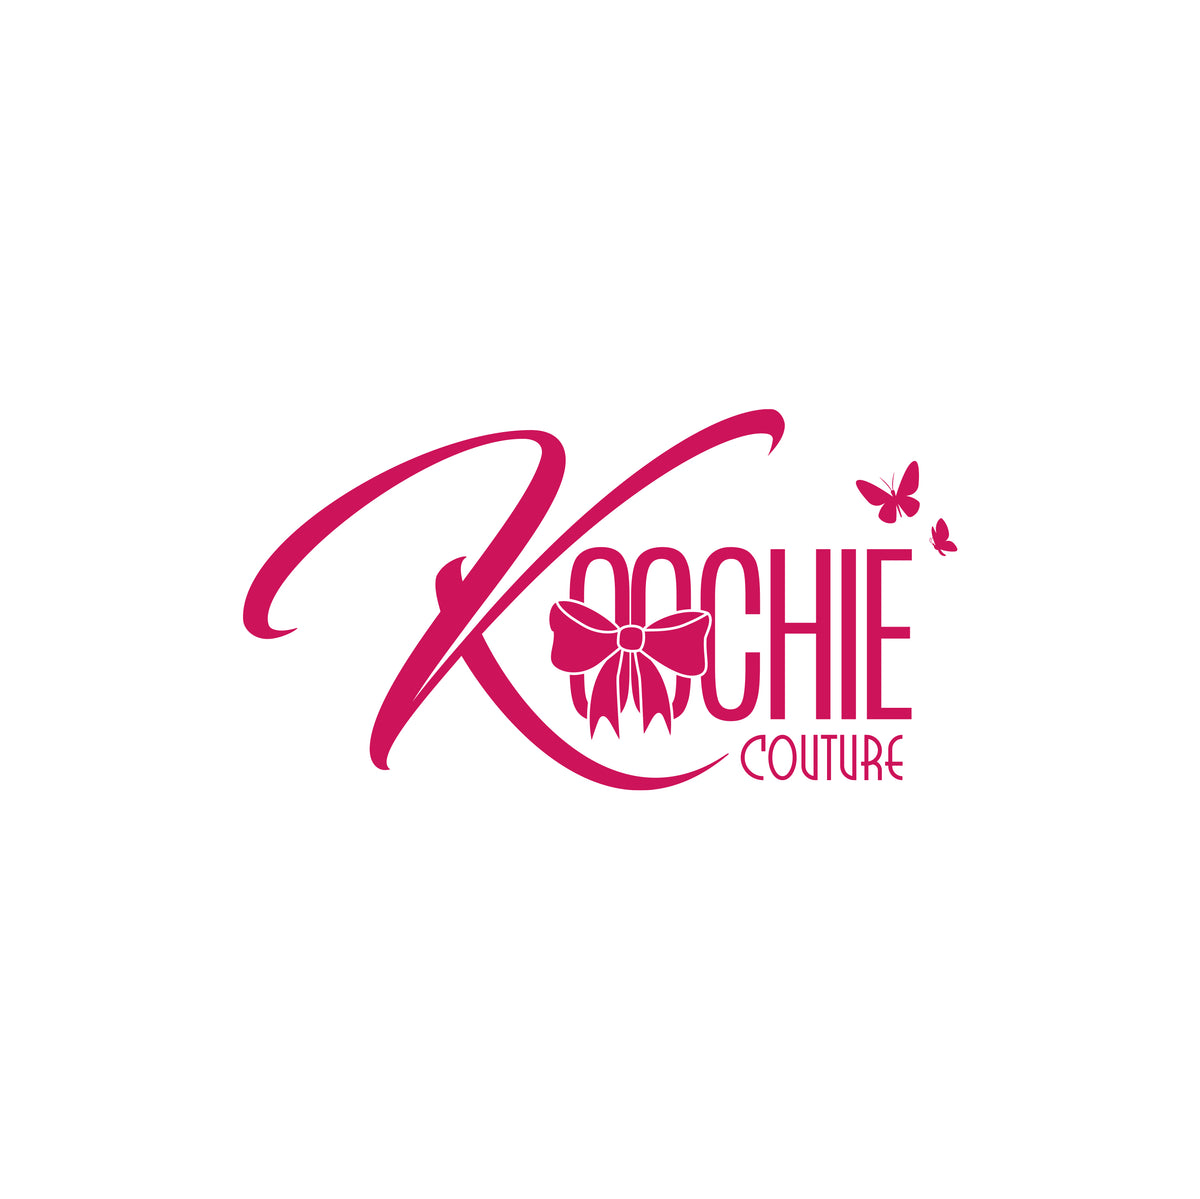 Koochie Couture